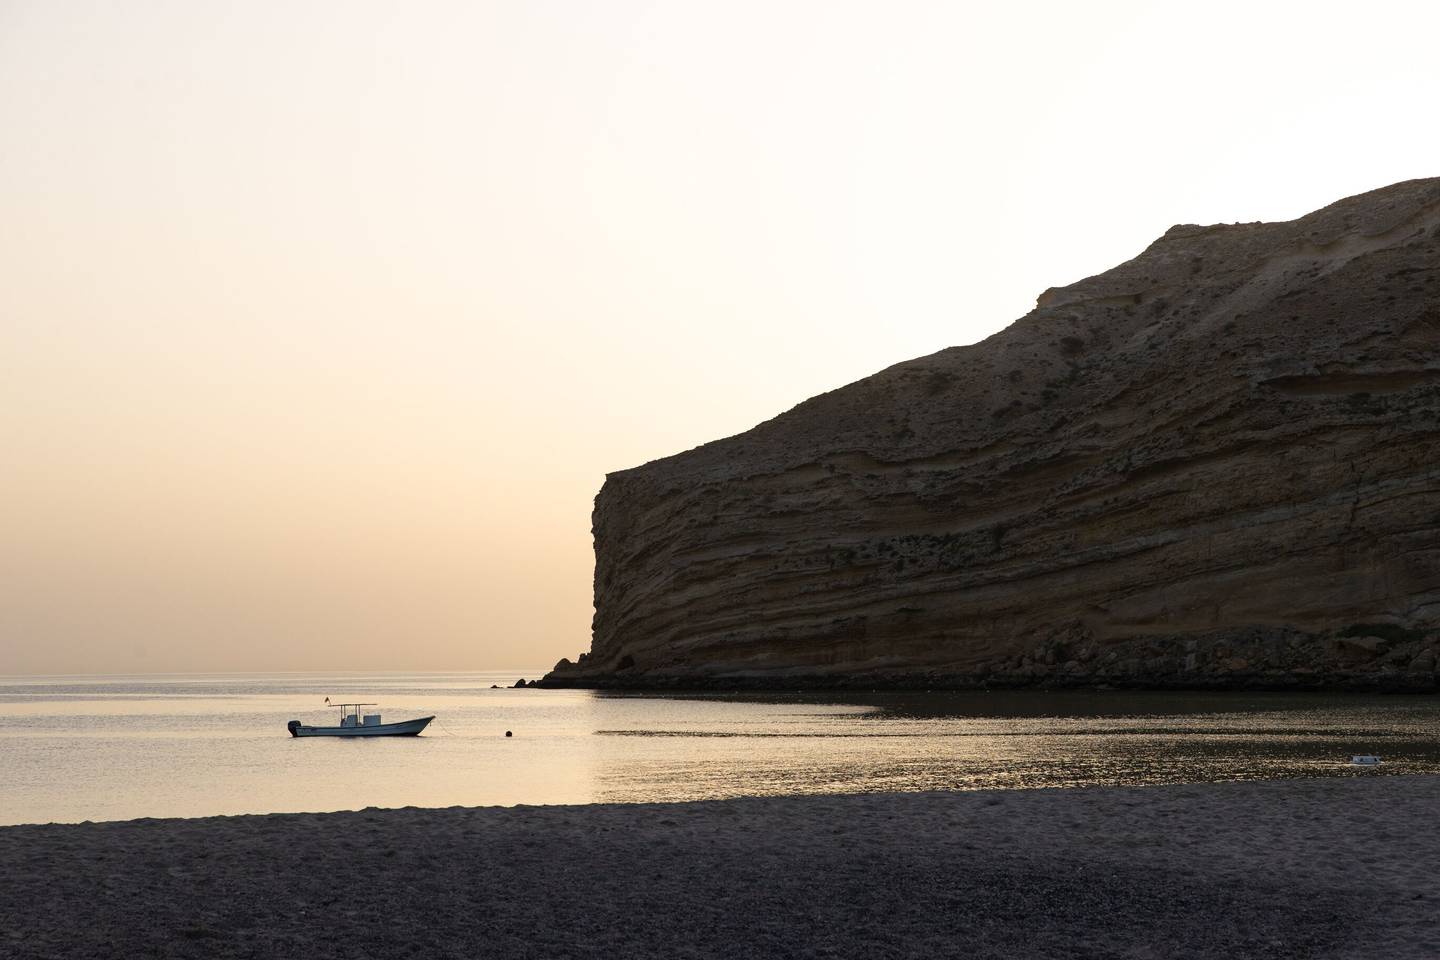 Oman's newest hotel is set in a secluded bay